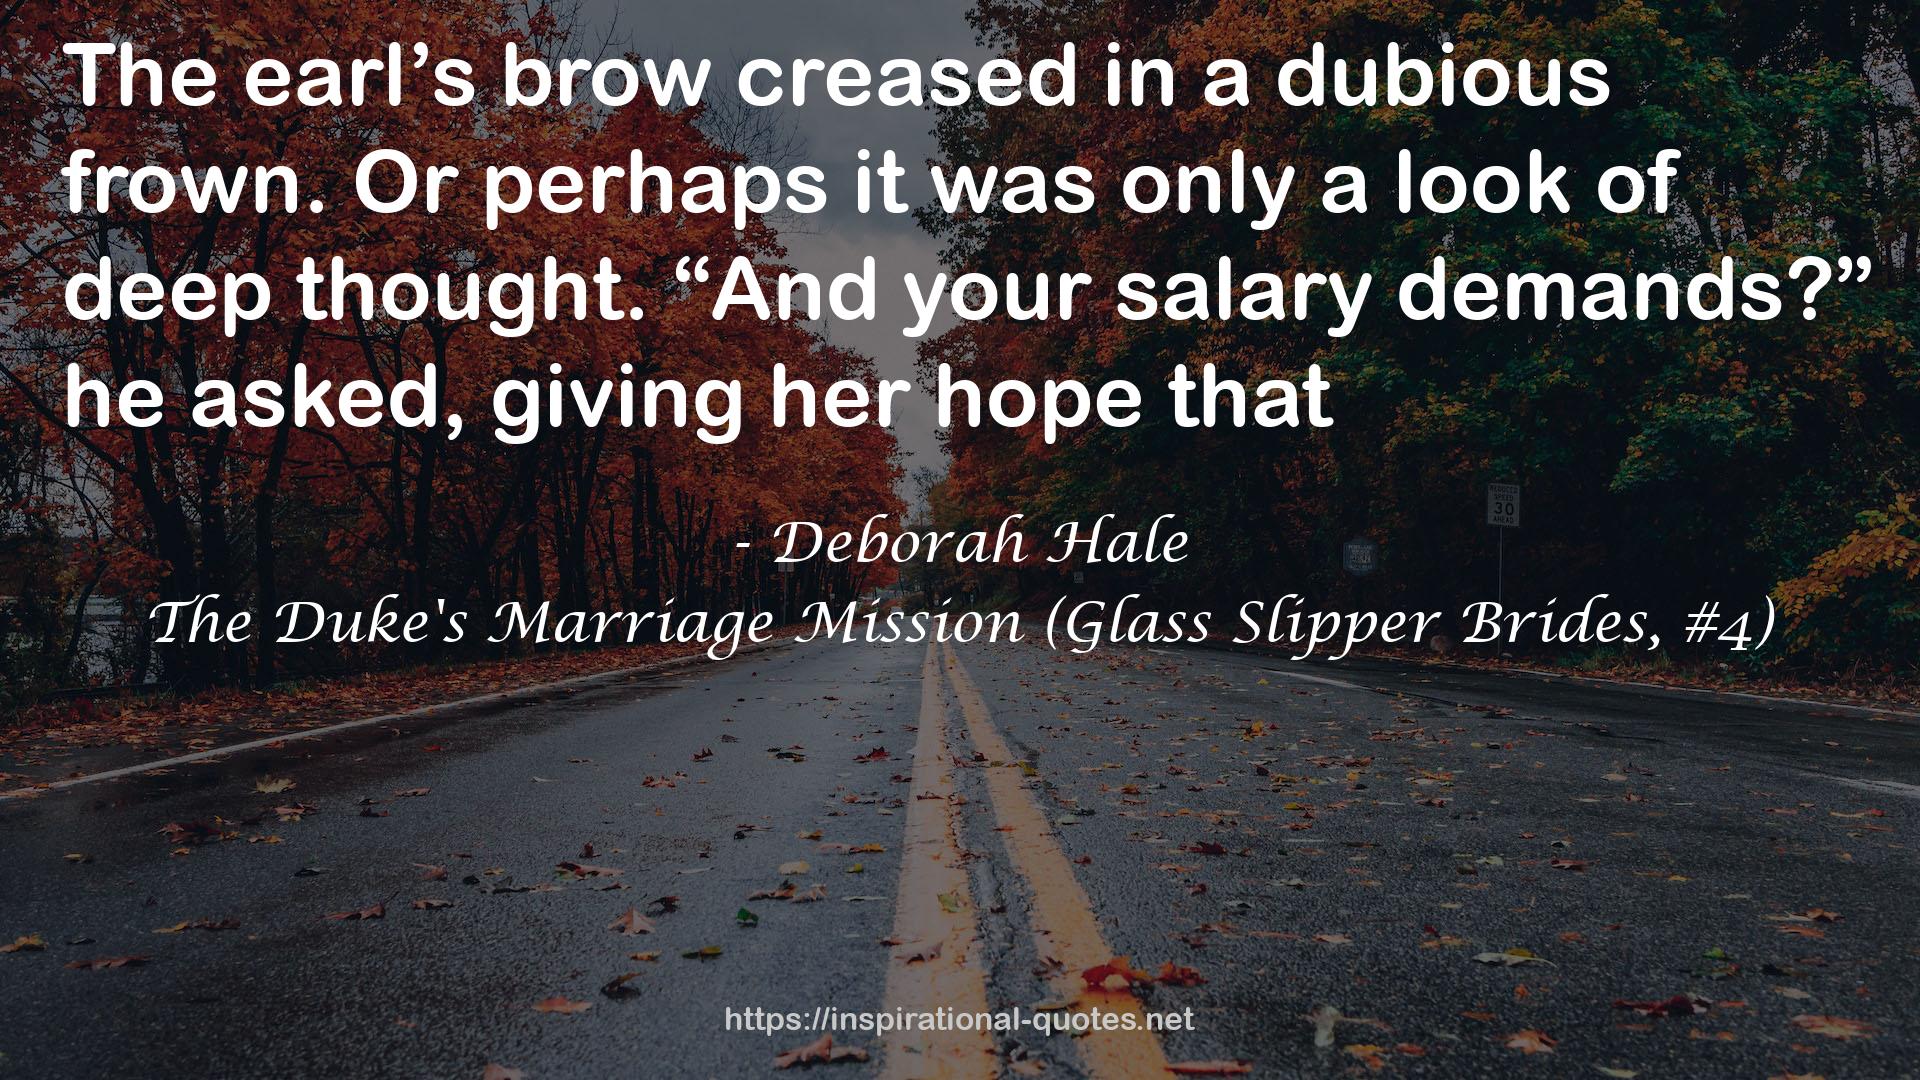 The Duke's Marriage Mission (Glass Slipper Brides, #4) QUOTES